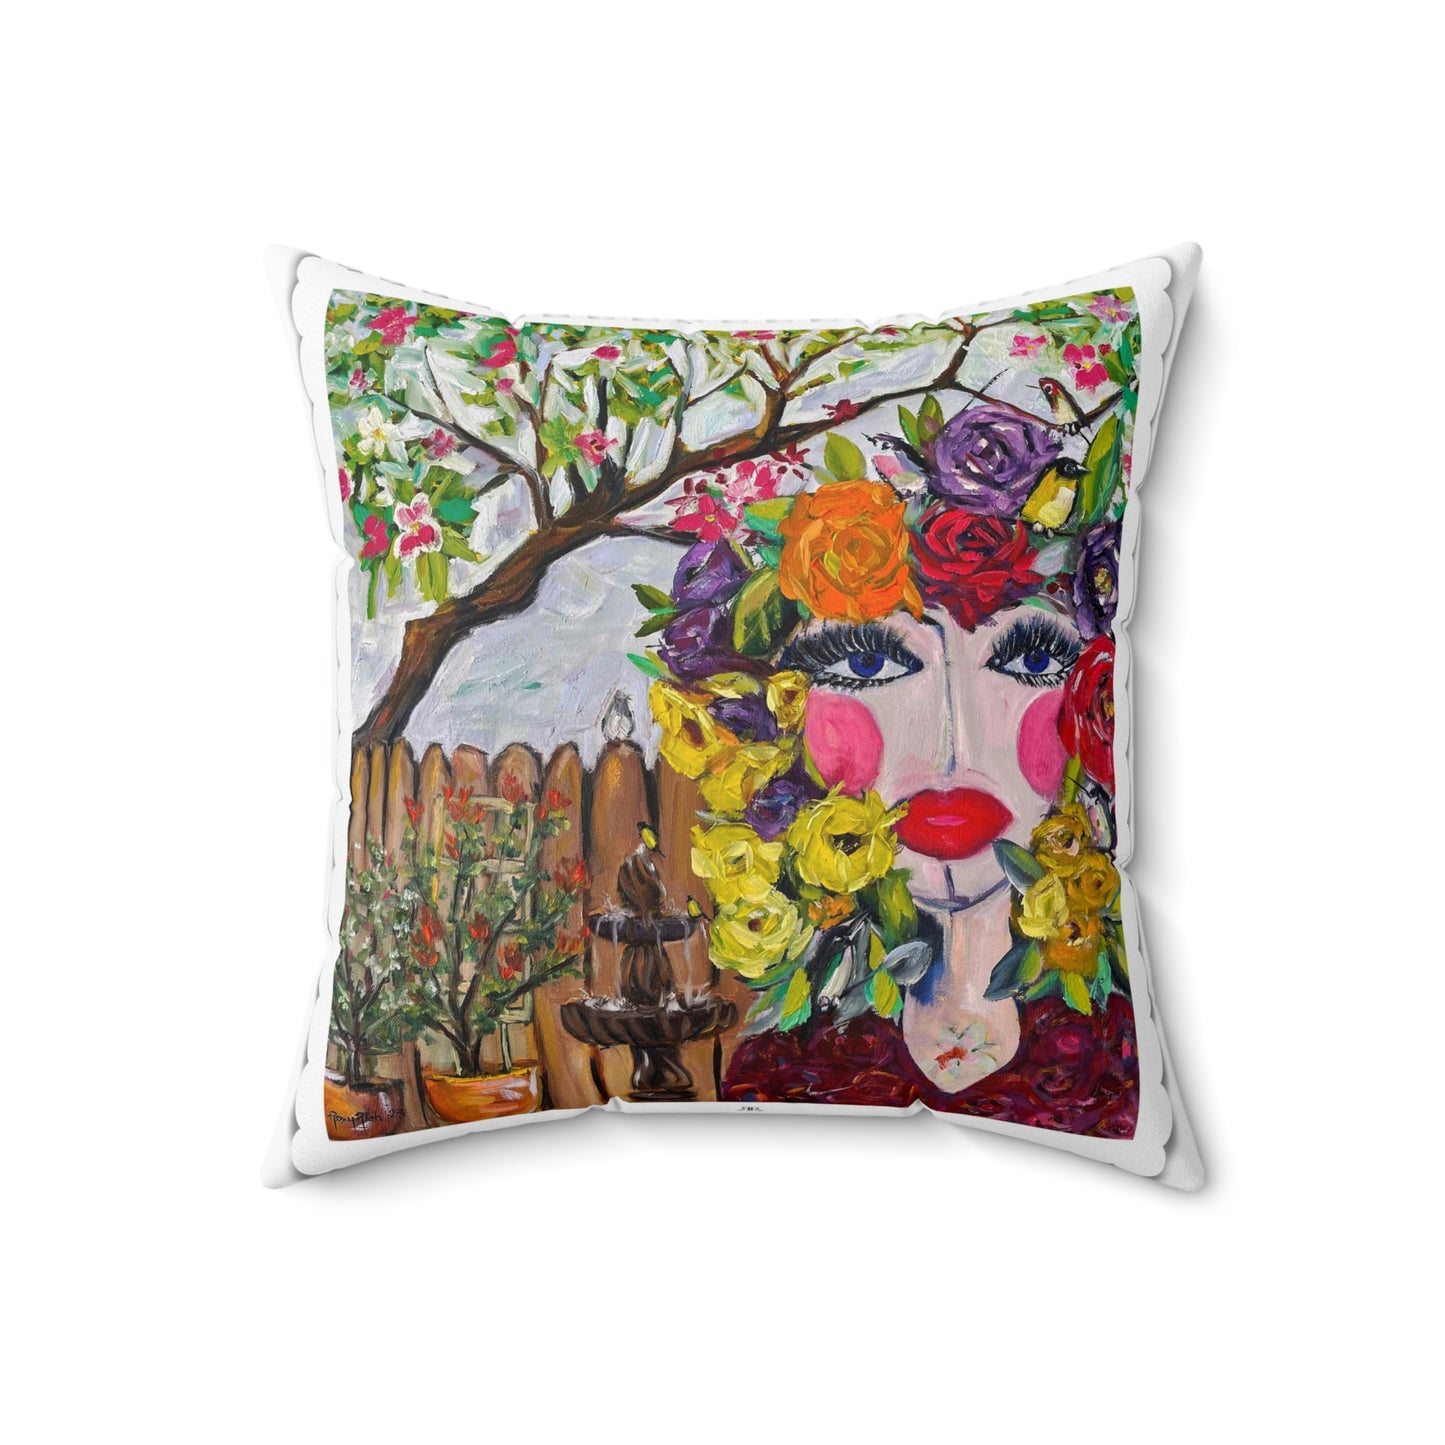 Birds and Blossoms Indoor Spun Polyester Square Pillow